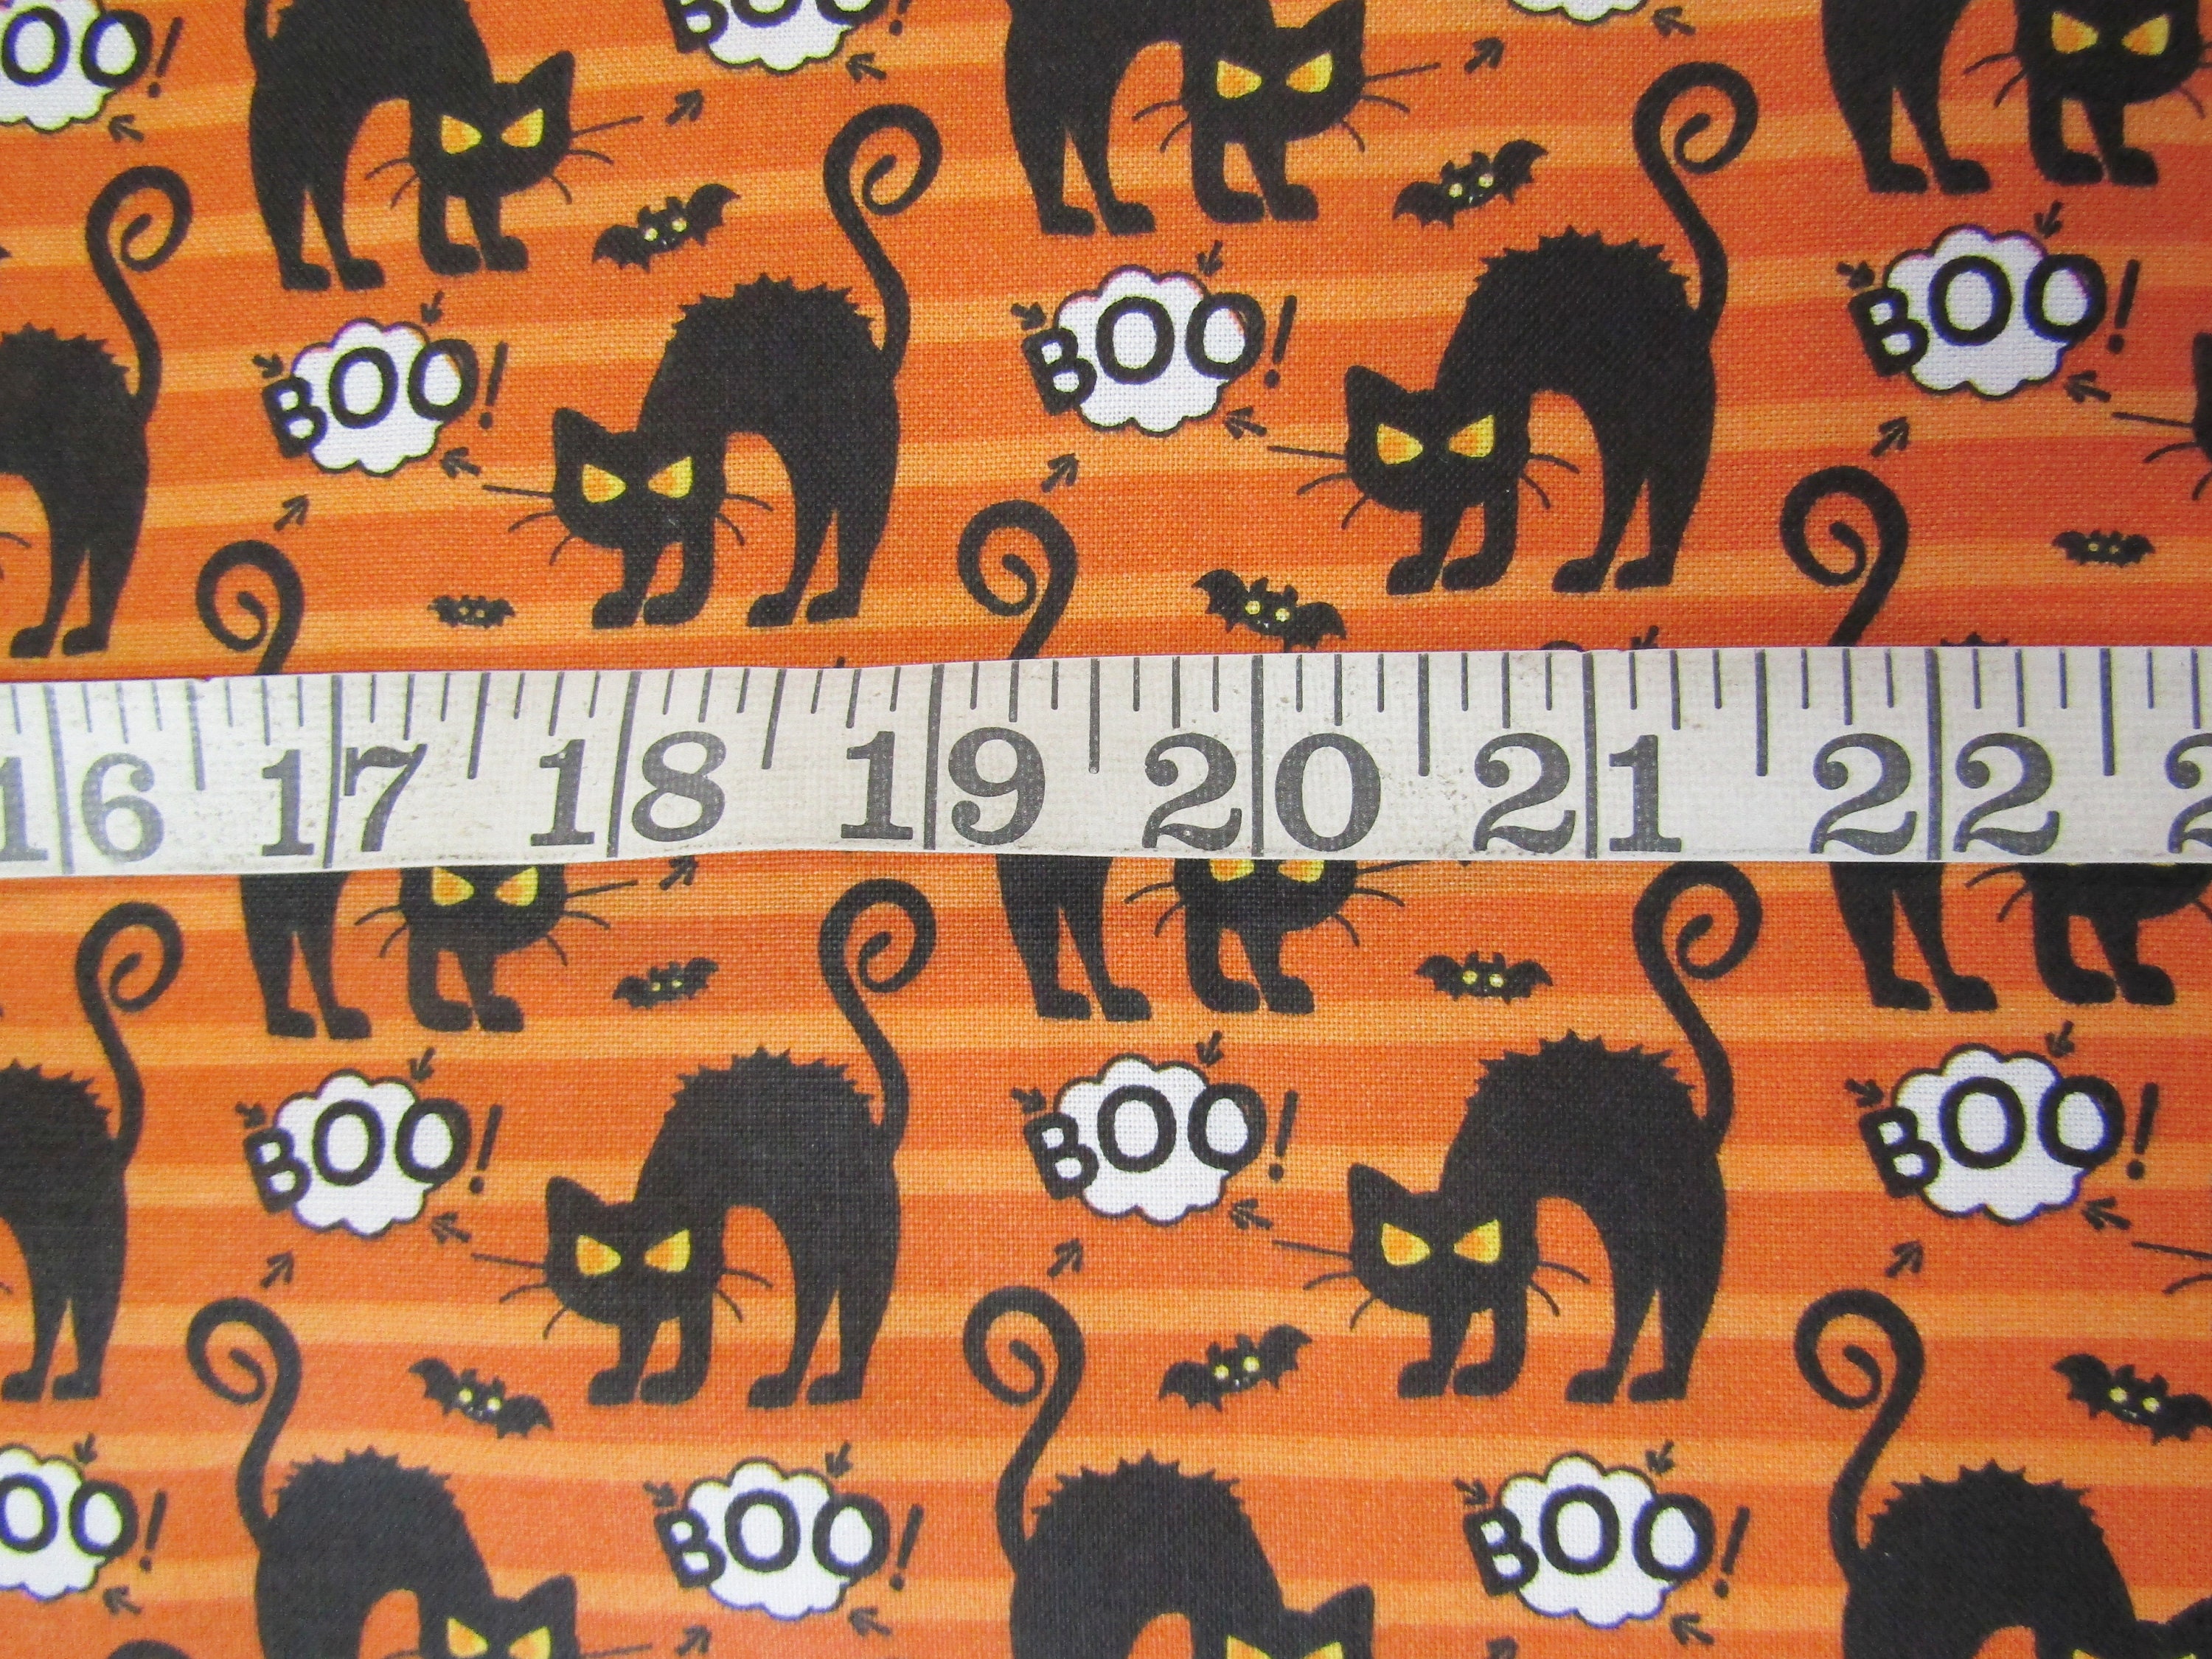 Halloween Fabric Angry Black Cat Fabric 100% Cotton | Etsy